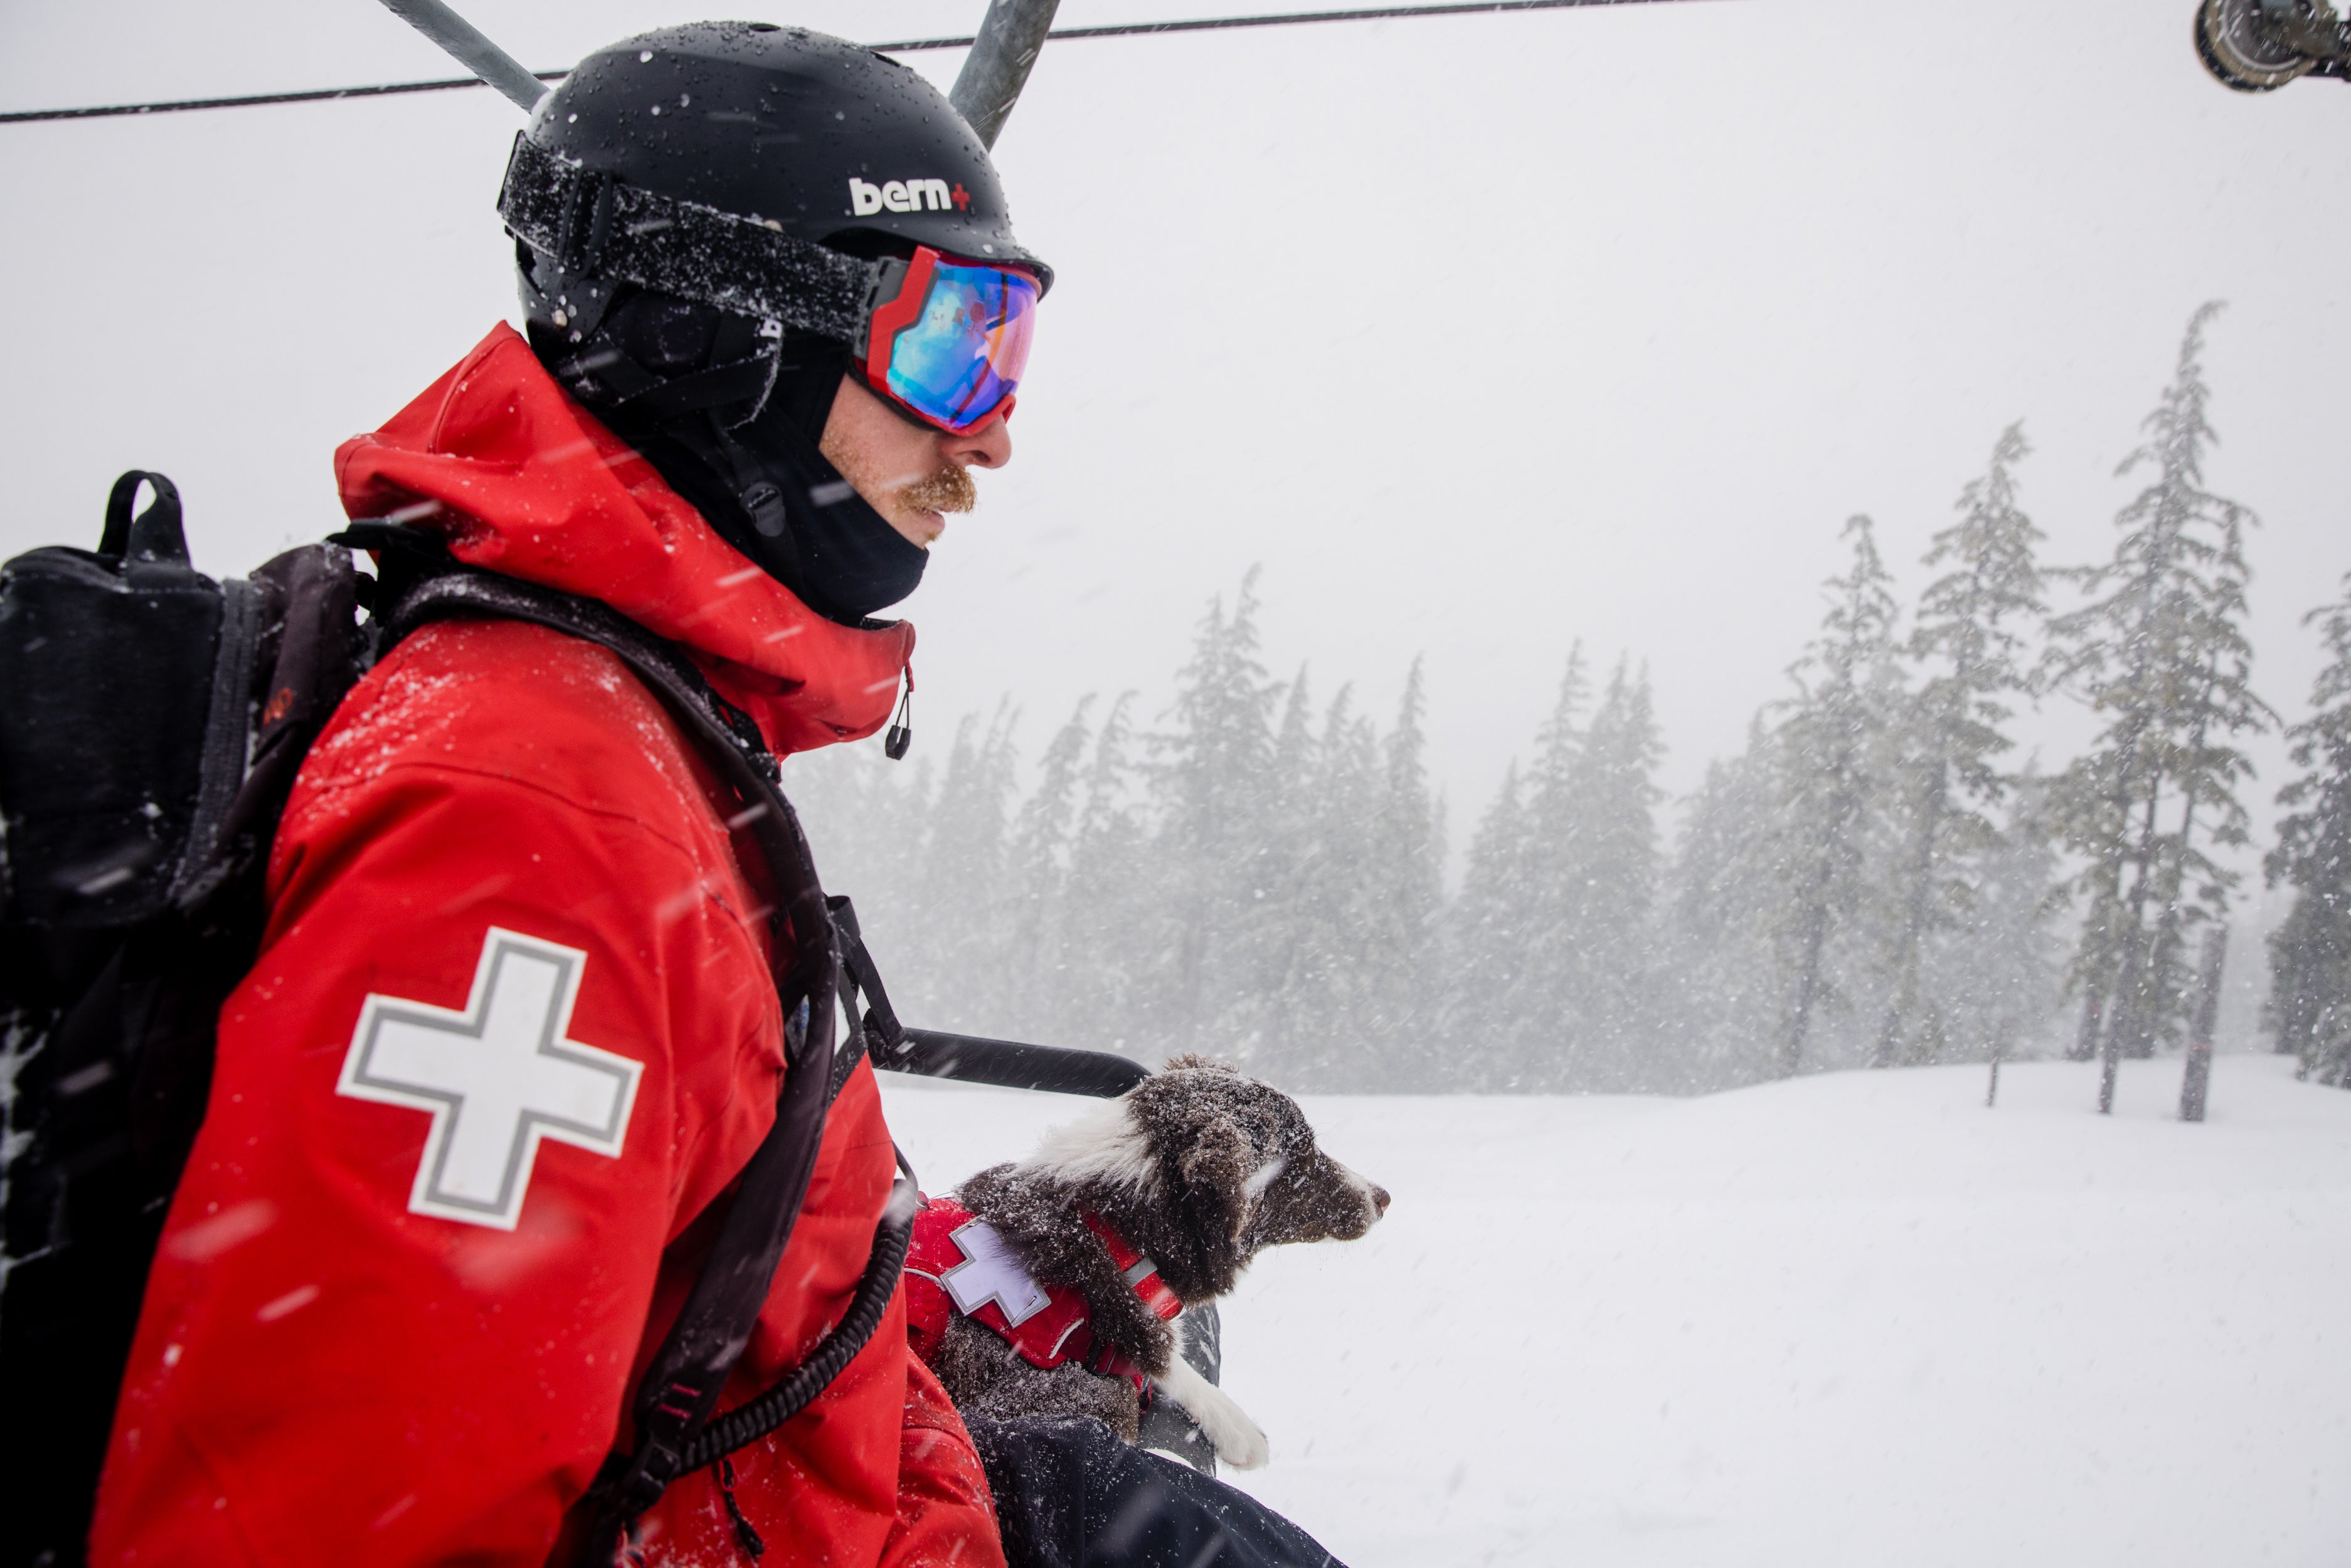 Alex the ski patroller and Ruddy the puppy ride together on the chairlift.